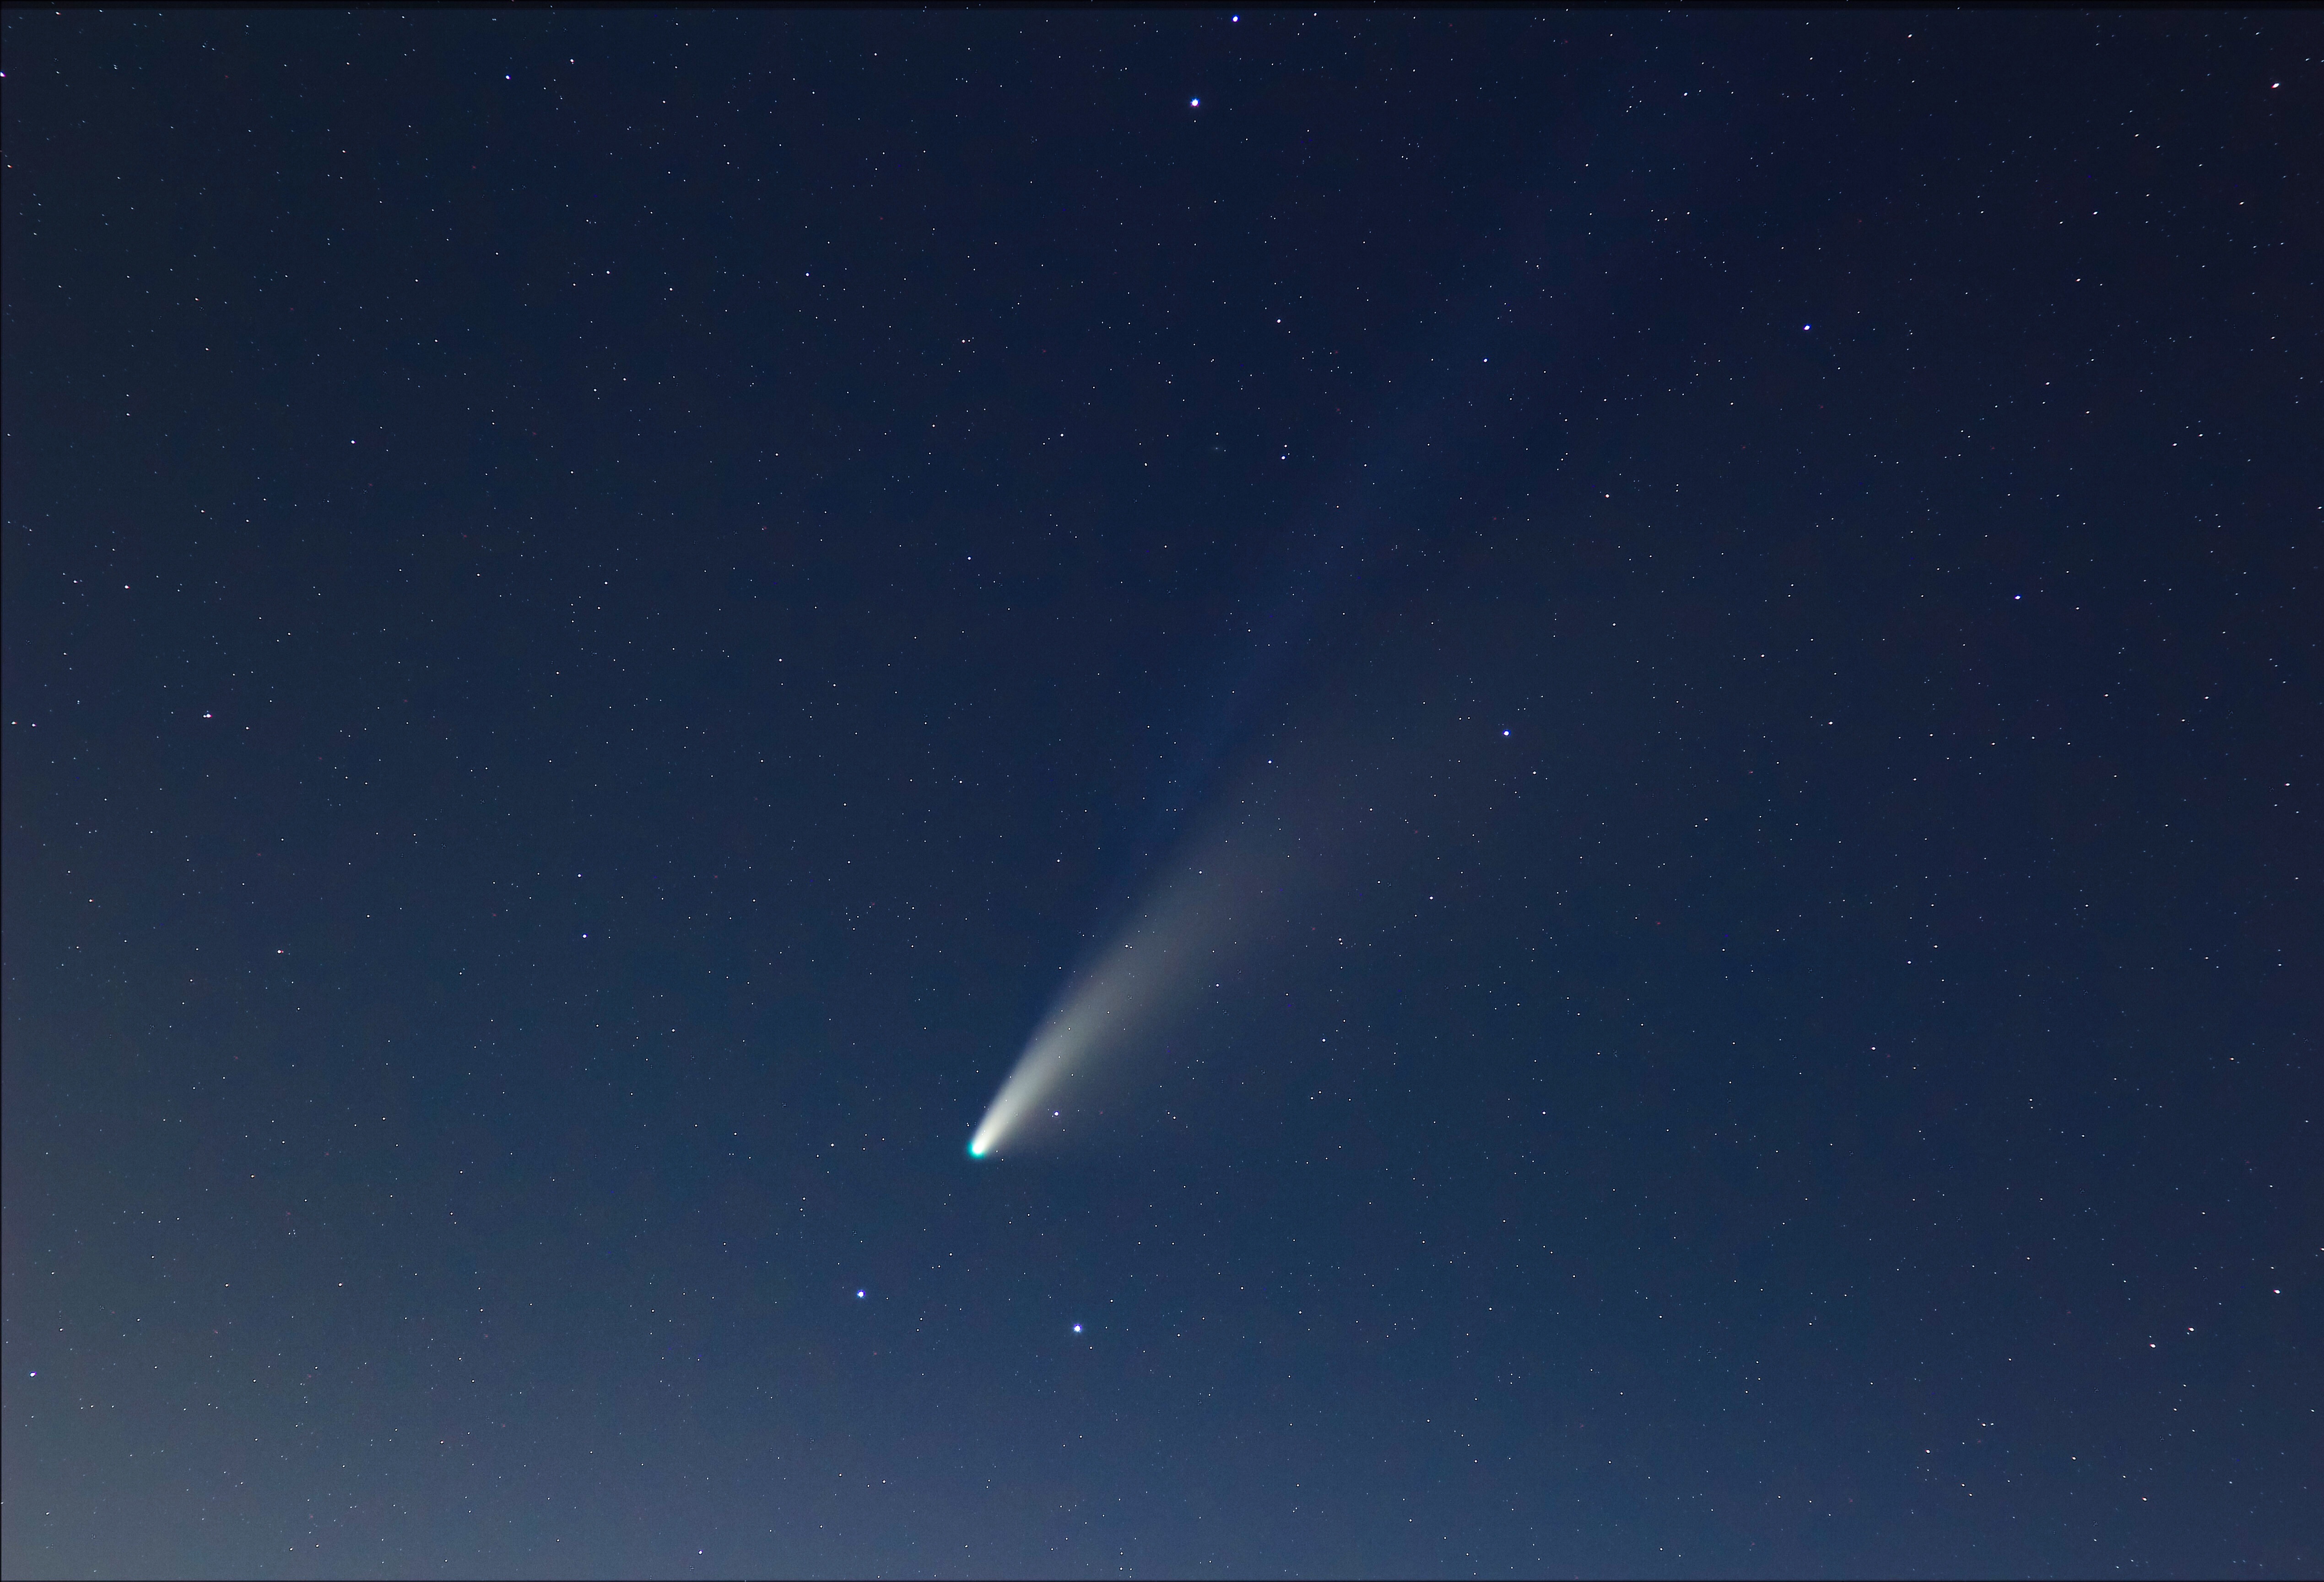 Comet Neowise and ion tail